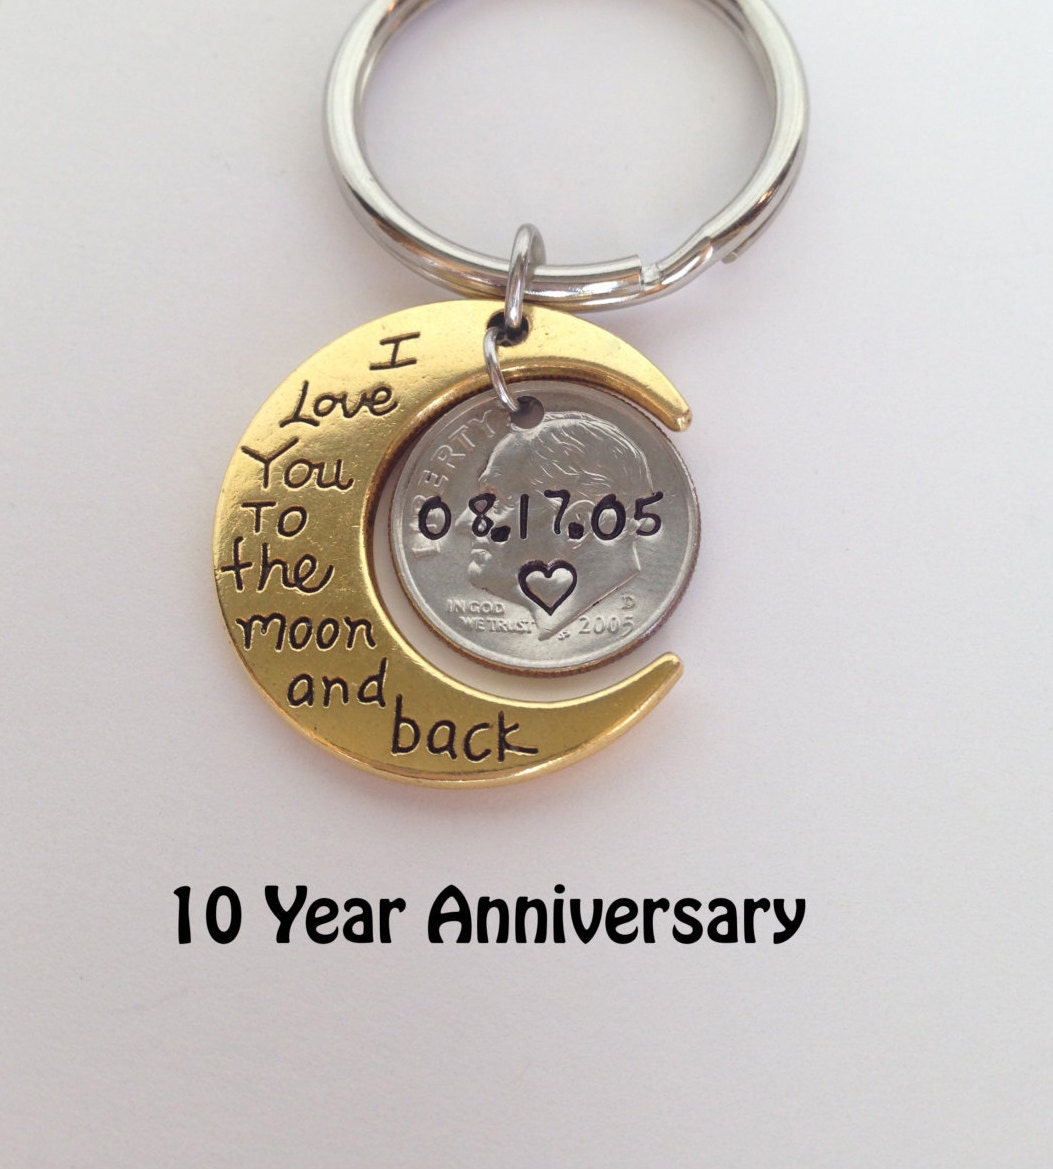 10 Year Anniversary Gifts For Him
 10 Year Anniversary Gift 10 Year Anniversary Gift for Him 10